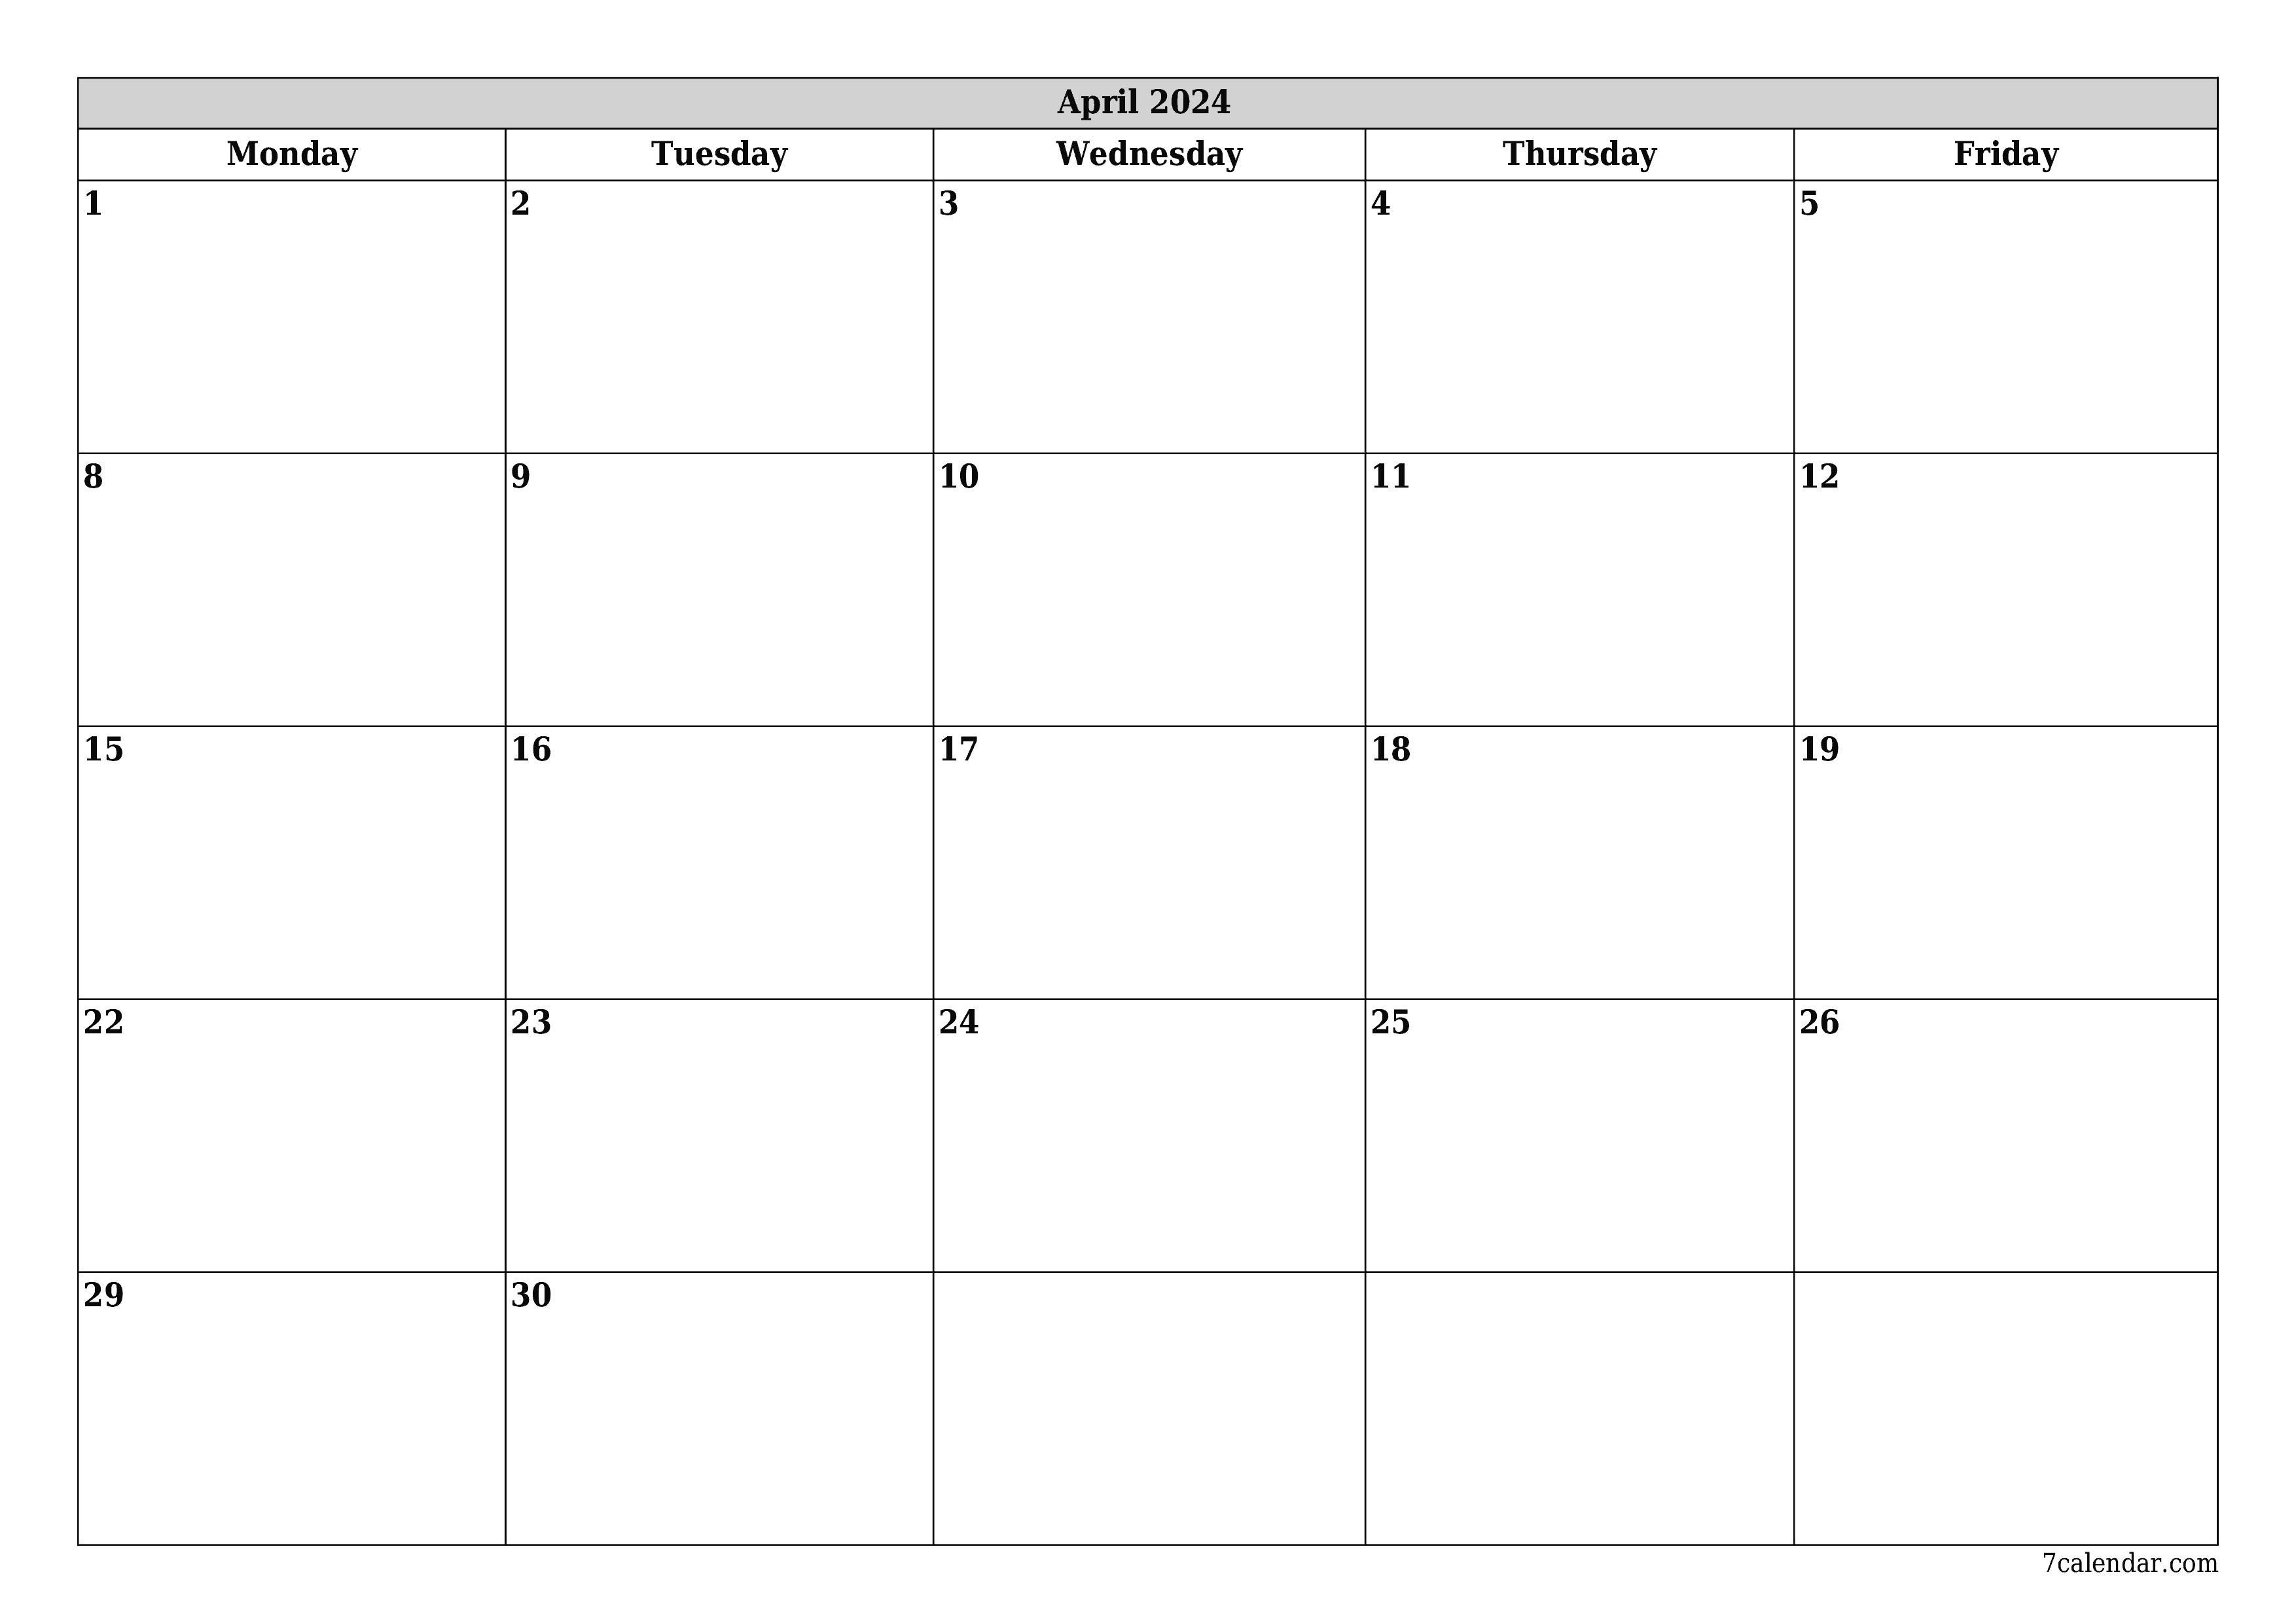 printable wall template free horizontal Monthly planner calendar April (Apr) 2024